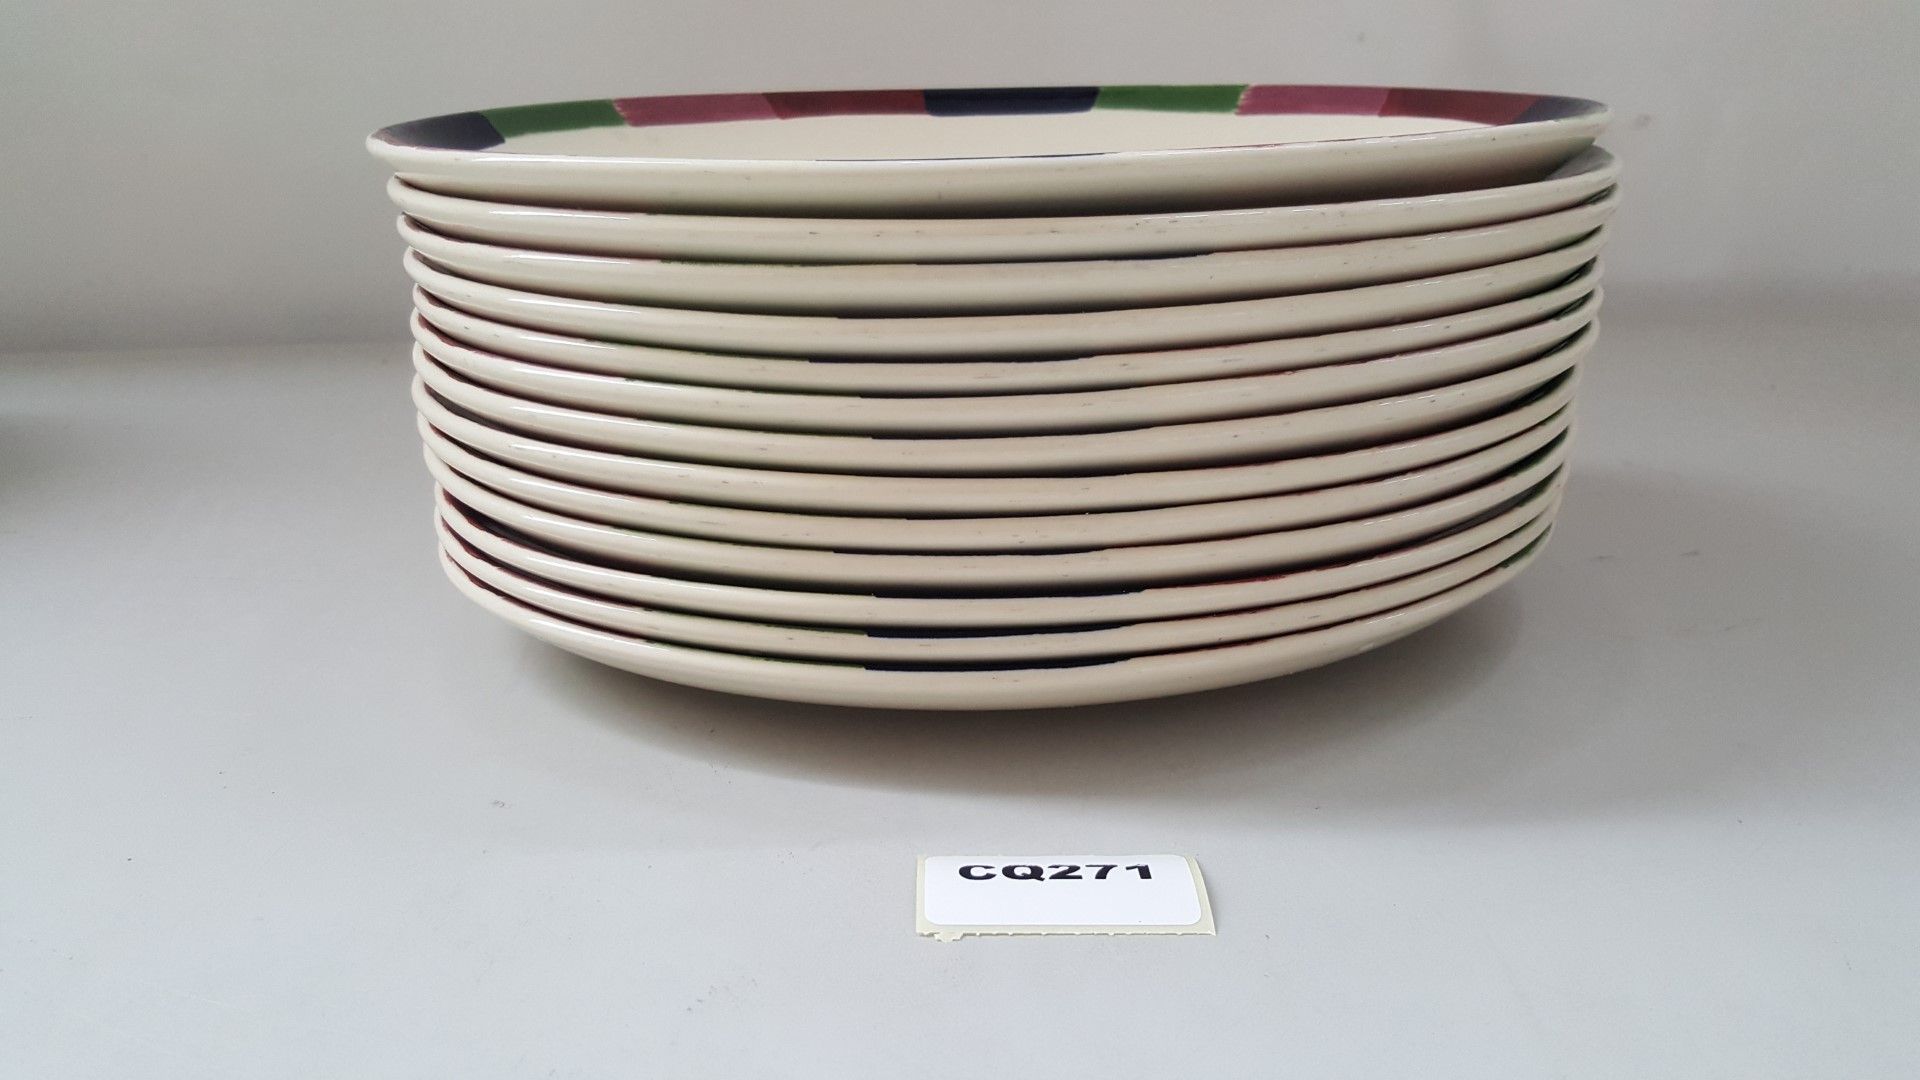 13 x Steelite Oval Serving Plates Cream With Pattered Egde L30/W23.5CM - Ref CQ271 - Image 3 of 5